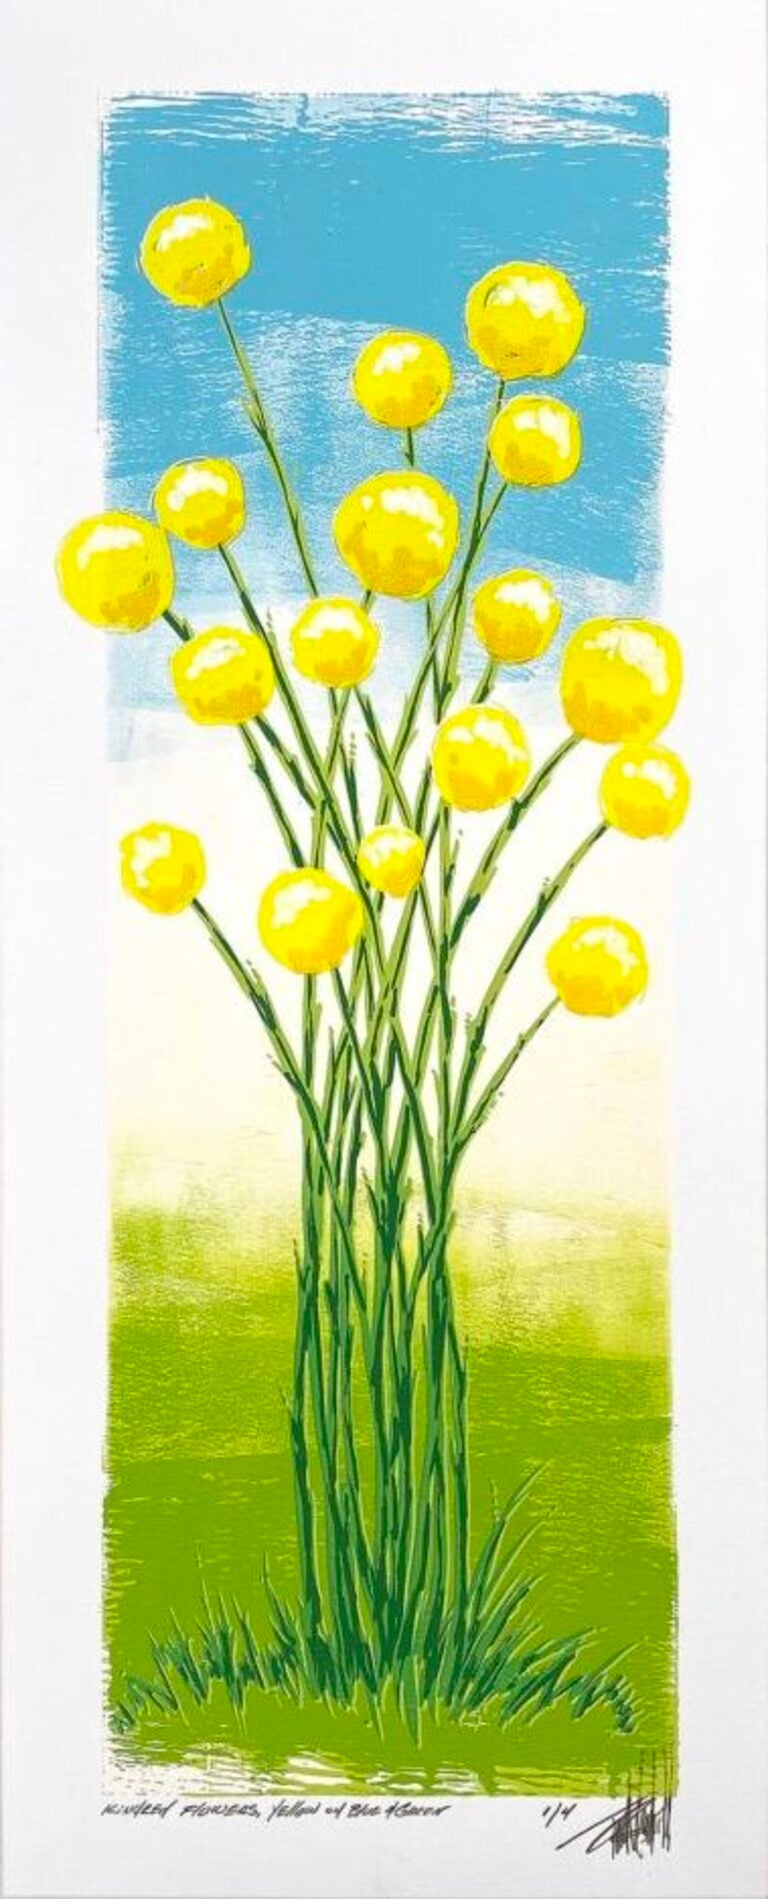 Kindred Flowers, Yellow on Blue & Green (3/4) - Print by Terrell Thornhill 